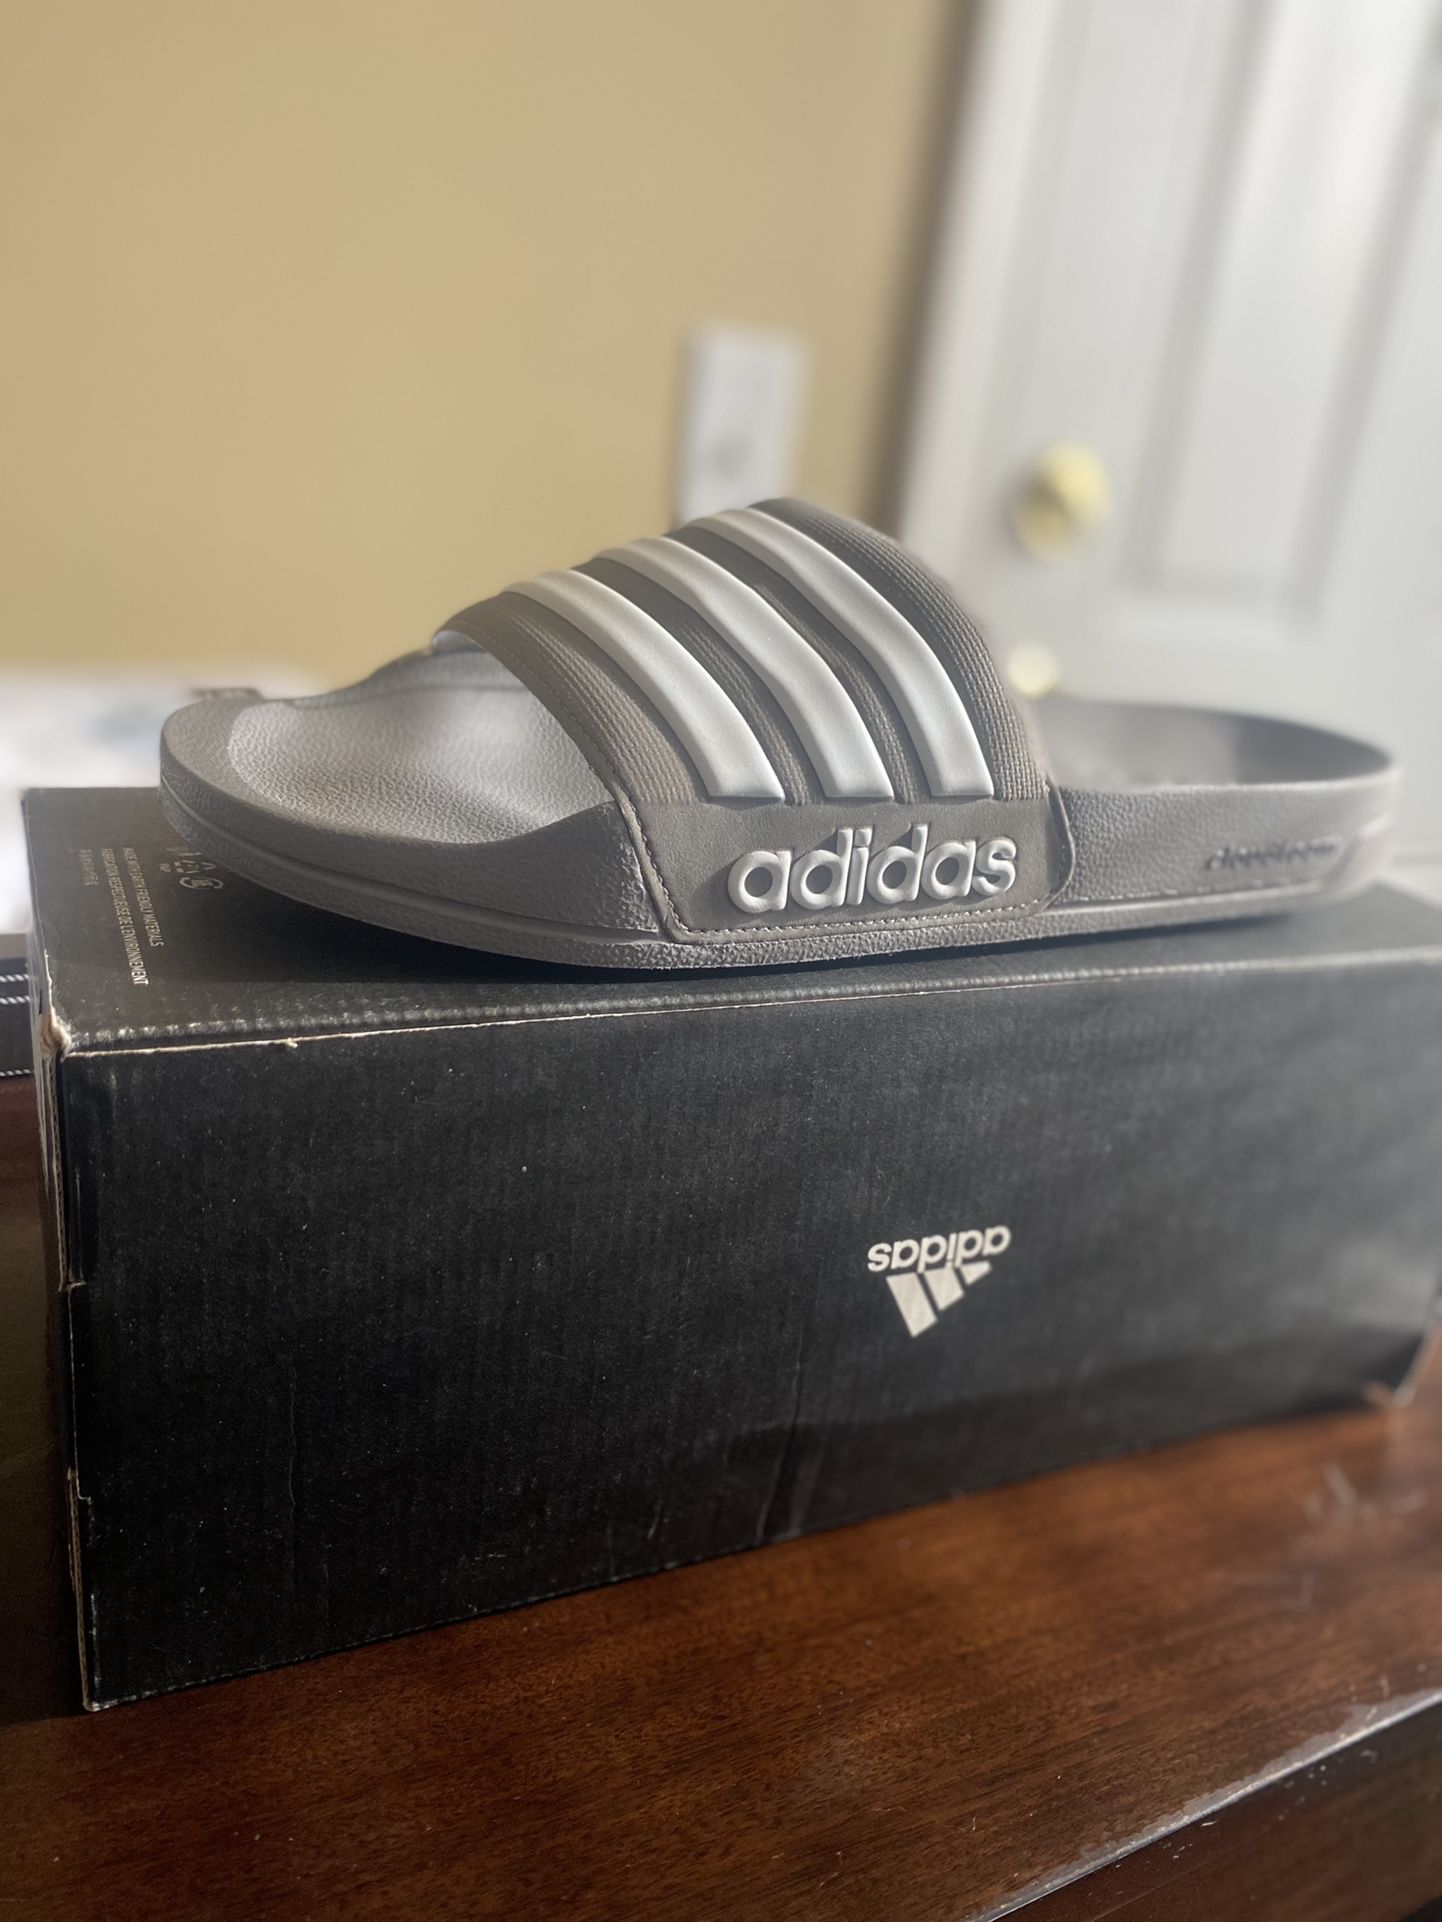 Adidas Shower Slippers